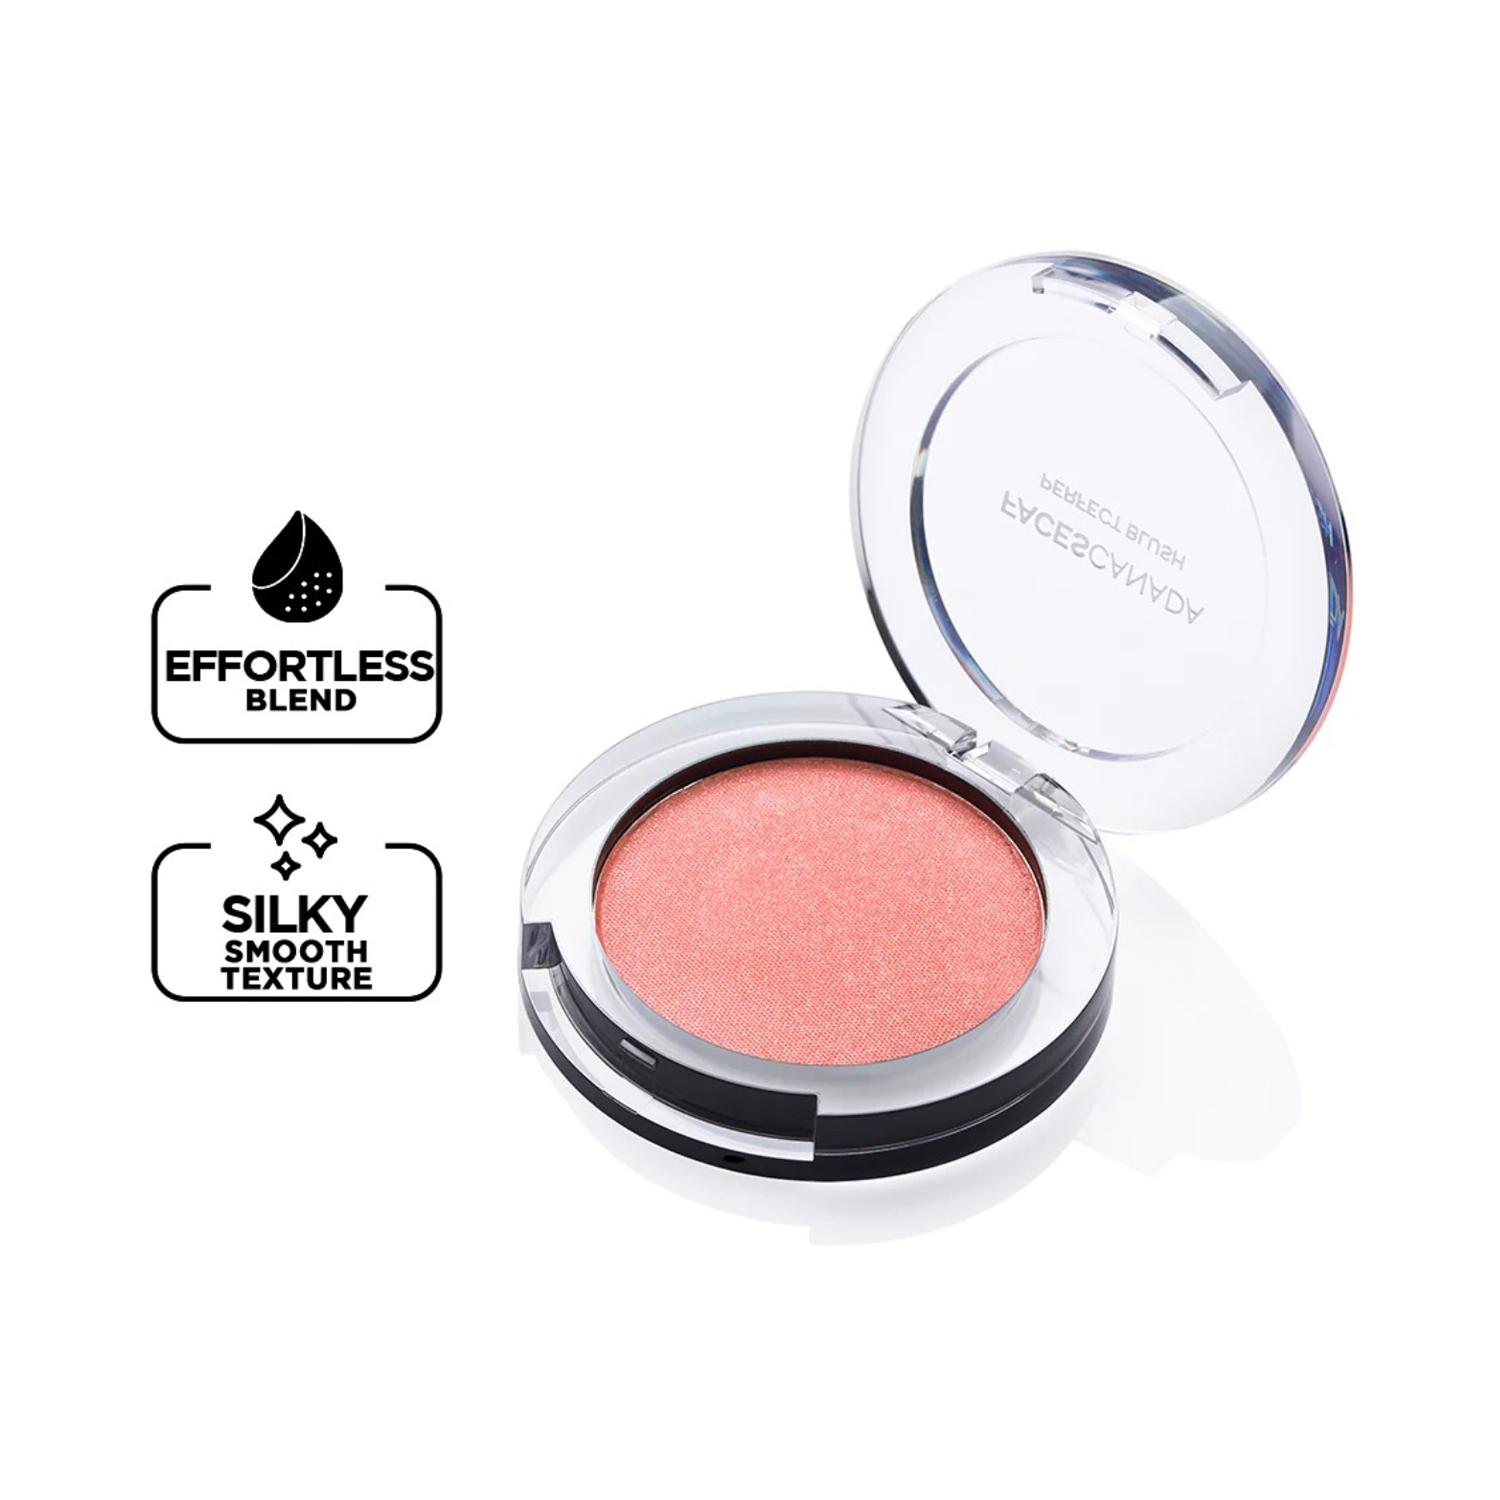 Faces Canada | Faces Canada Perfecting Blush - Coral Pink 01, Lightweight & Long Lasting Natural Looking Glow (5 g)